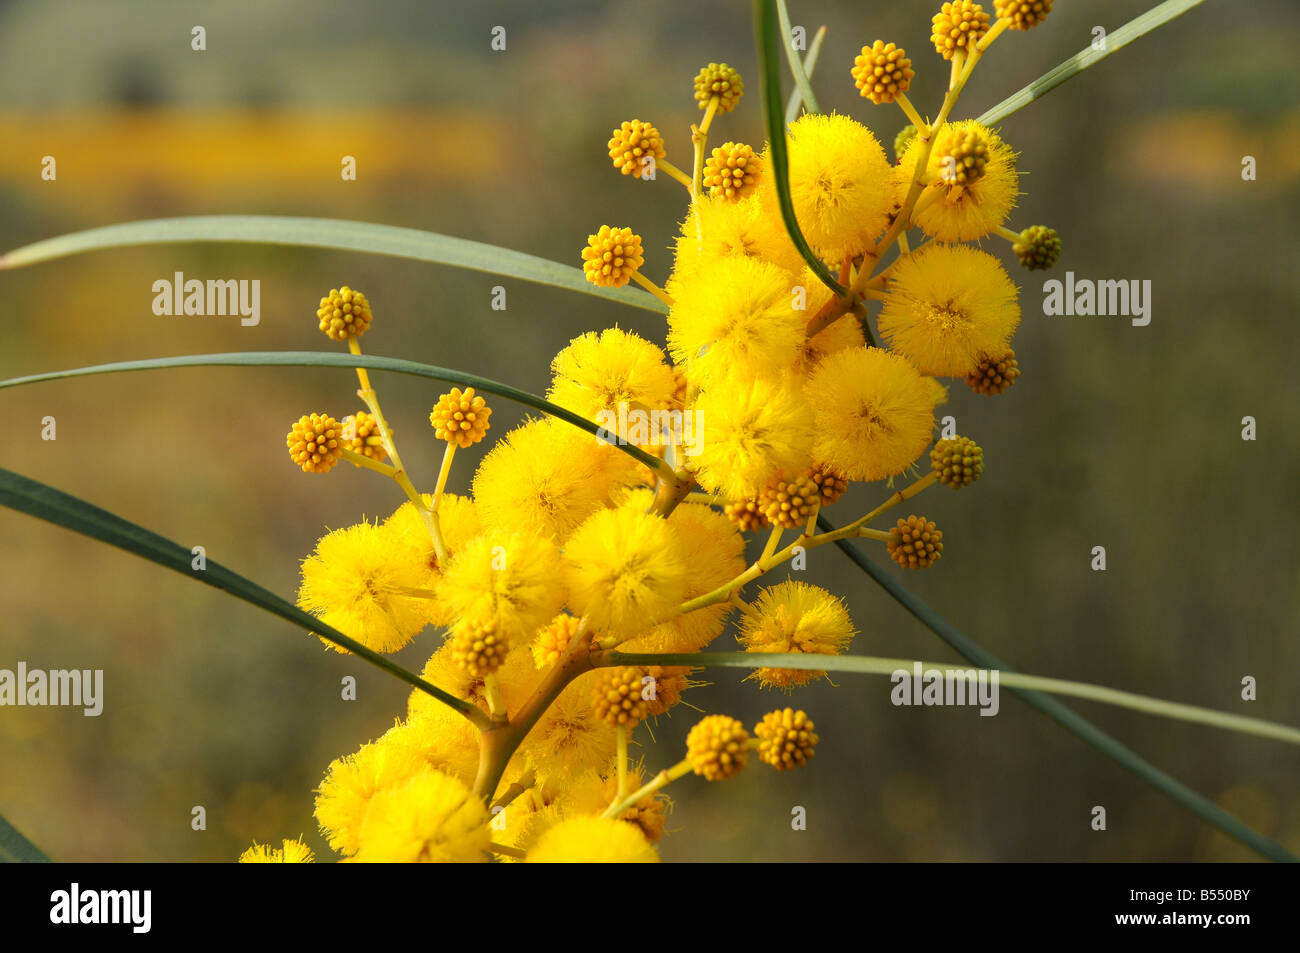 Acacia saligna flowering profusely with yellow balls of soft powdery puffs Stock Photo